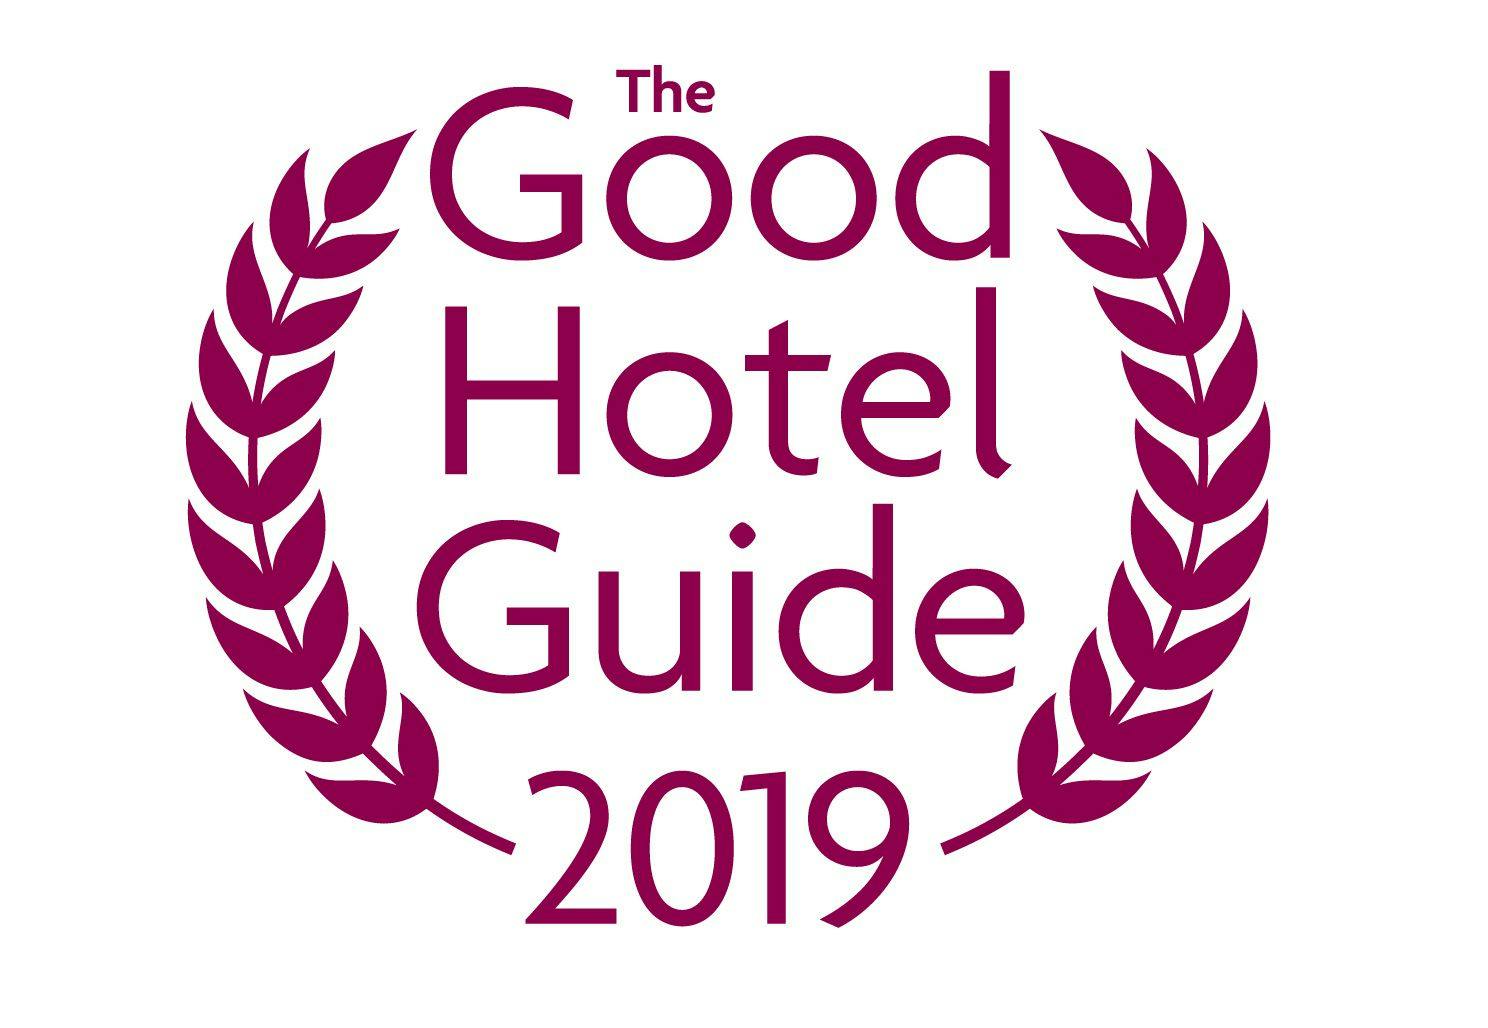 Good Hotel Guide 2019